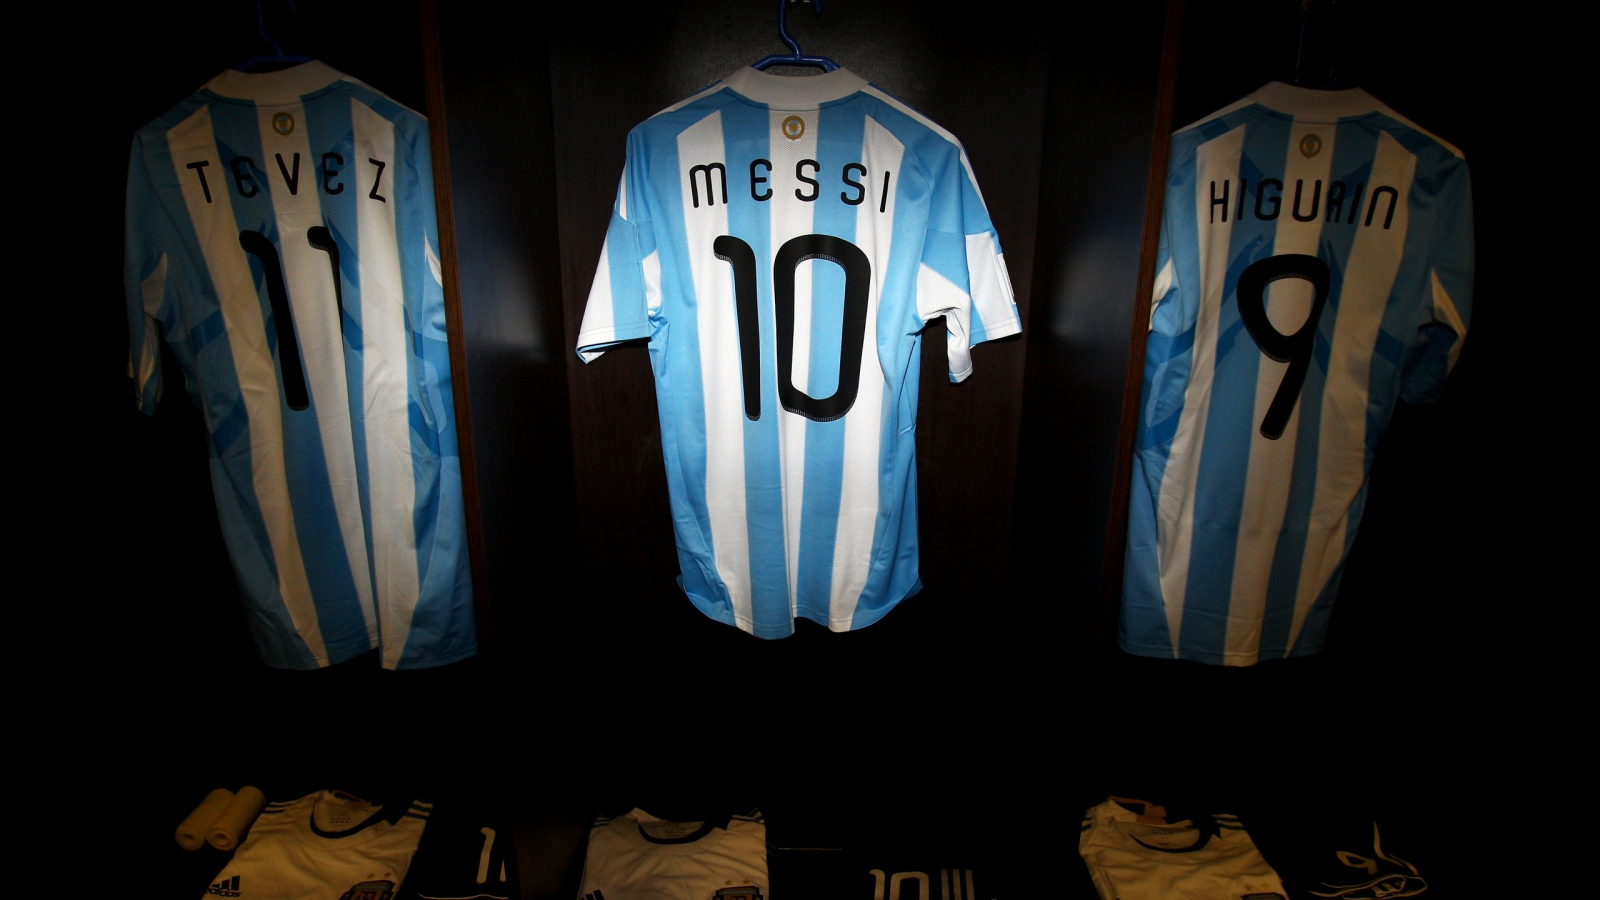 Tshirt of Messi, Tevez and Higuain for 1600 x 900 HDTV resolution